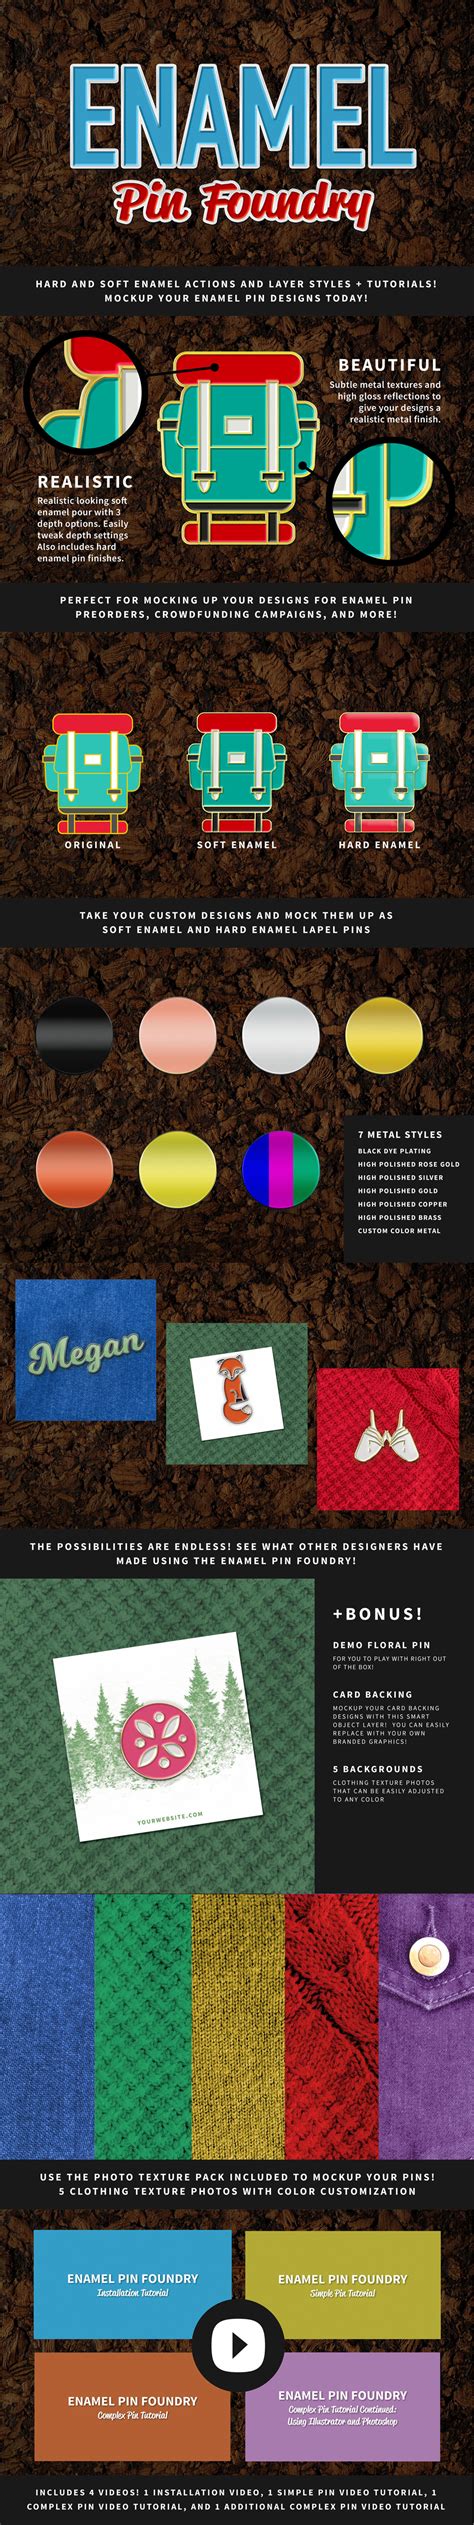 The Enamel Pin Foundry Photoshop Toolkit Has Actions And Layer Styles